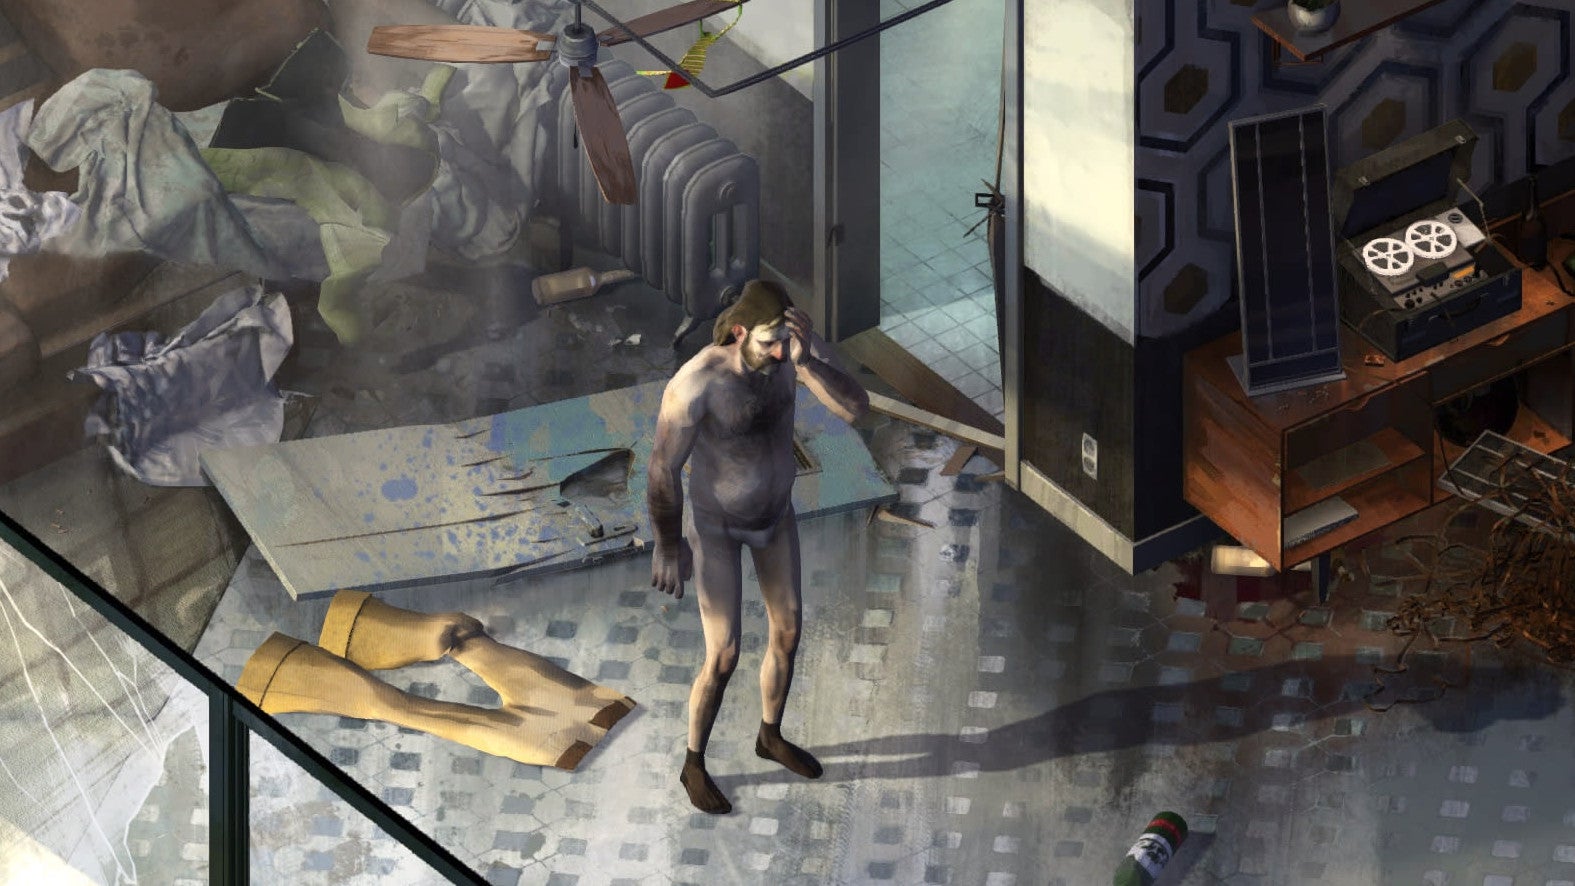 Disco Elysium developer alleges innovative potential customers were “fired on wrong premises”